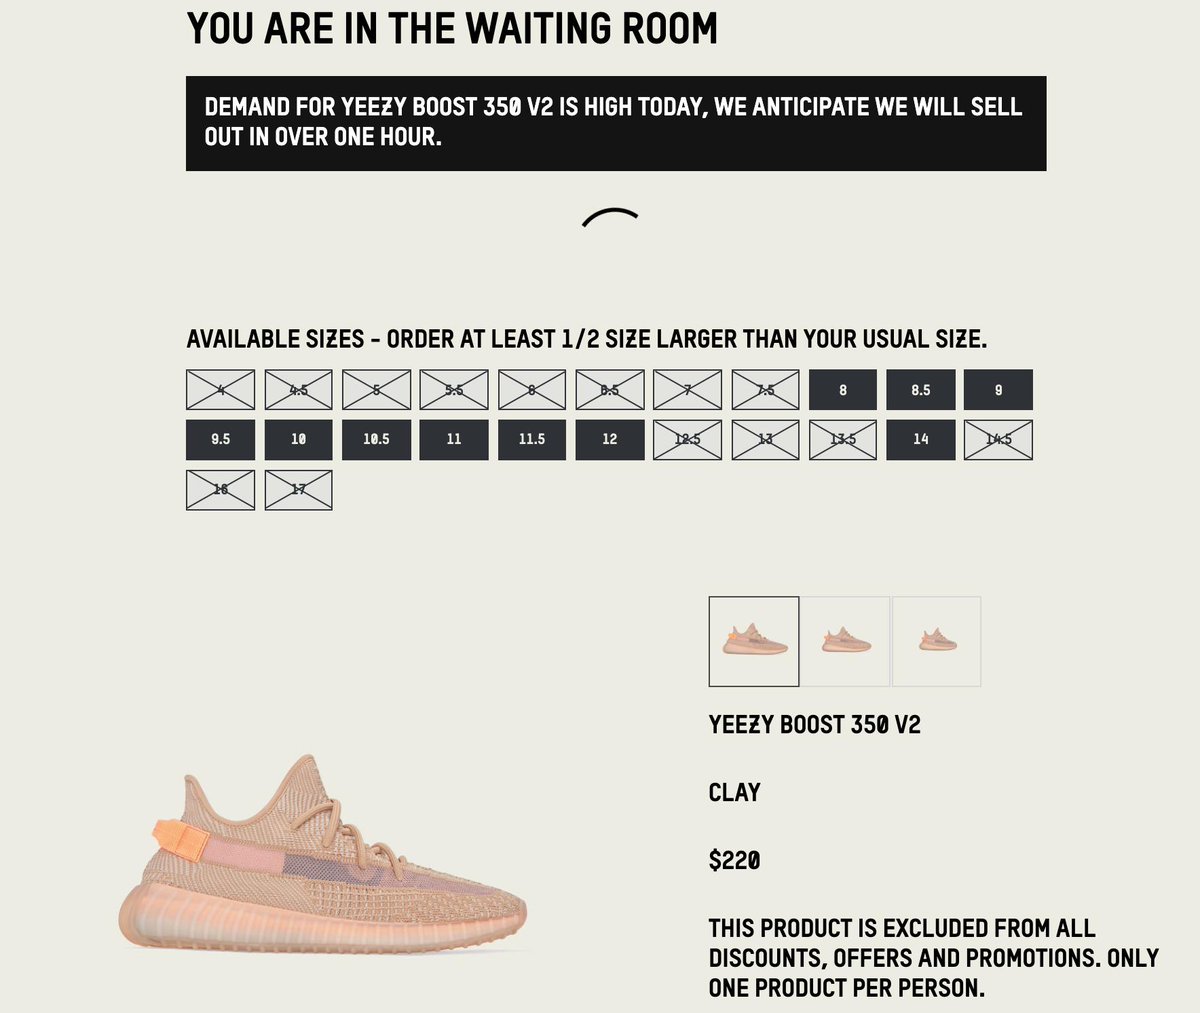 how to get out of waiting room yeezy